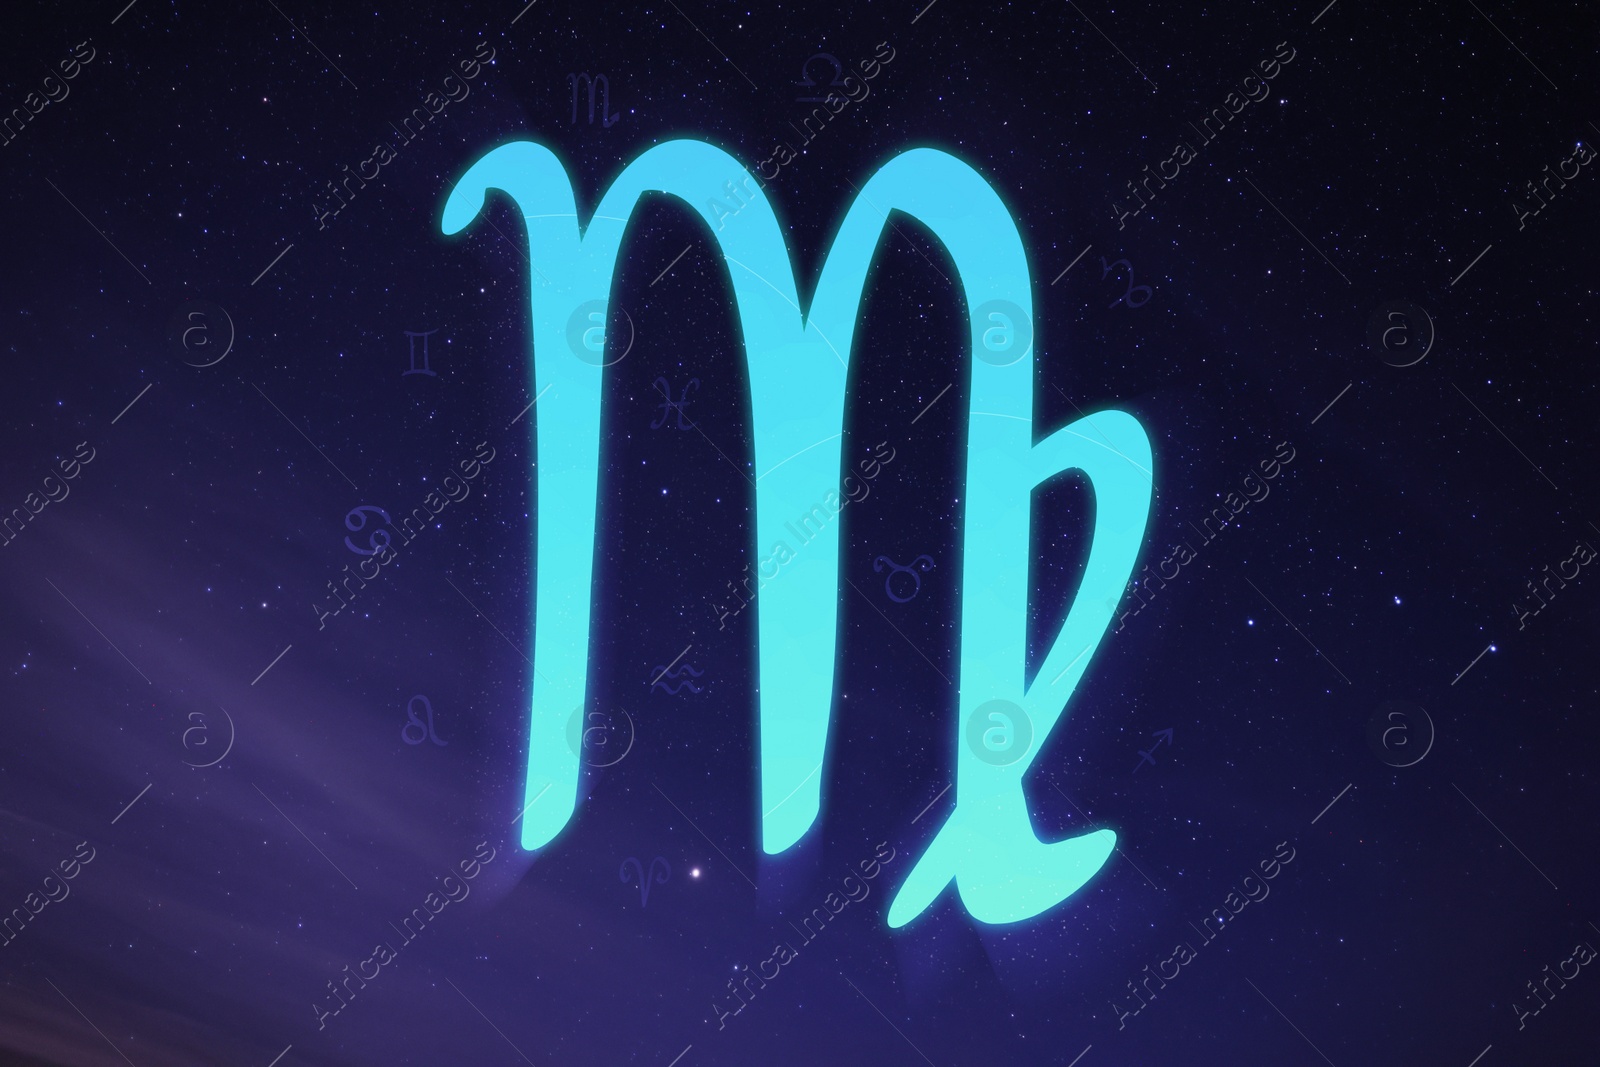 Illustration of Virgo astrological sign in night sky with beautiful sky